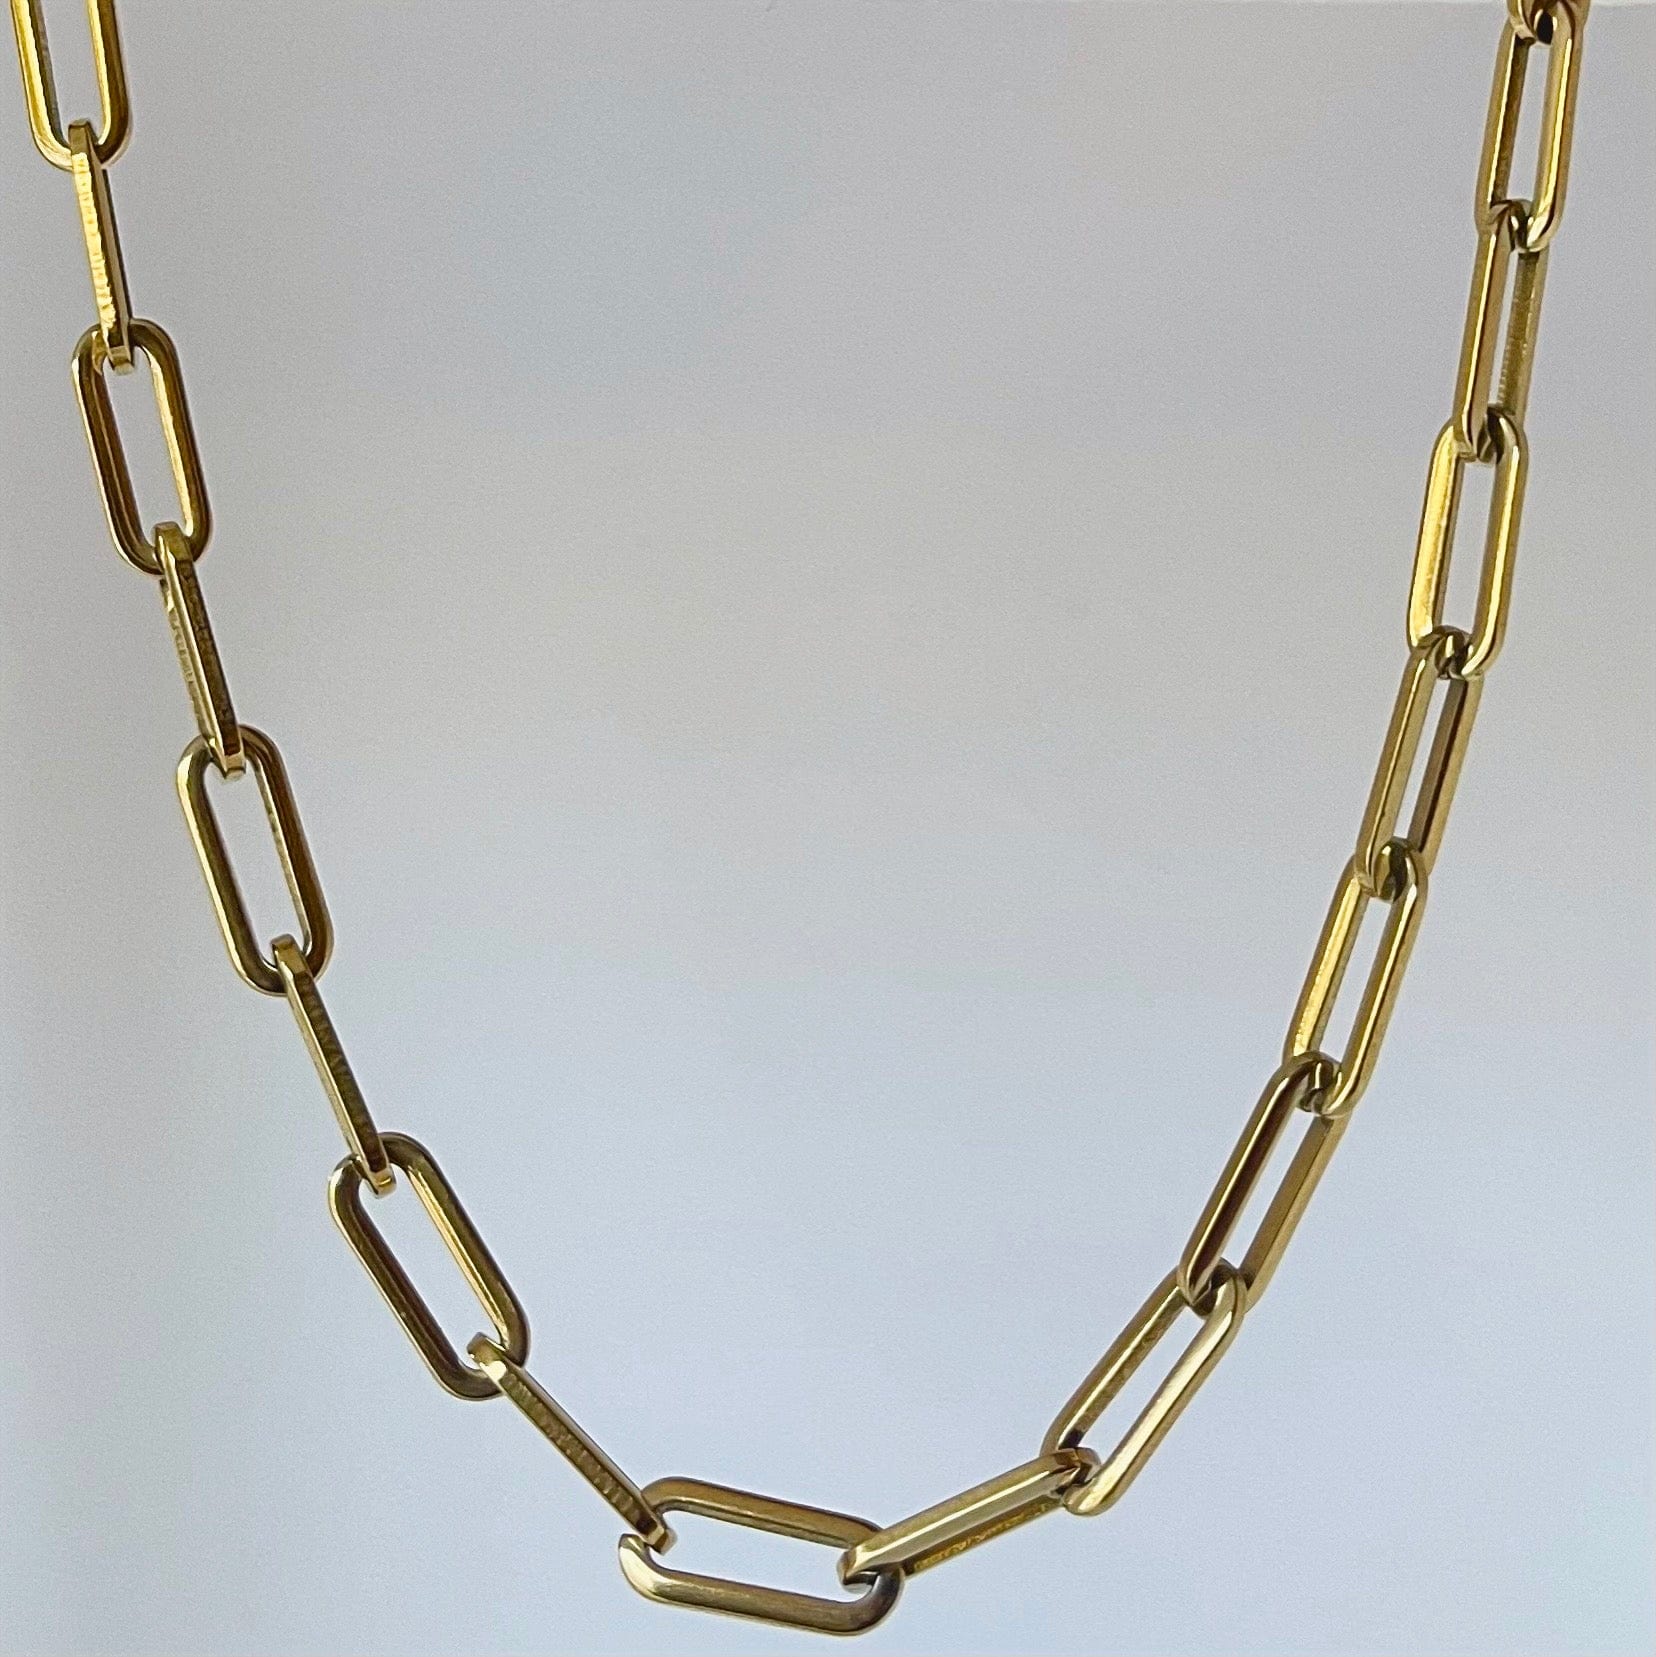 Asanti by Koi Necklaces Golden Thick Chain